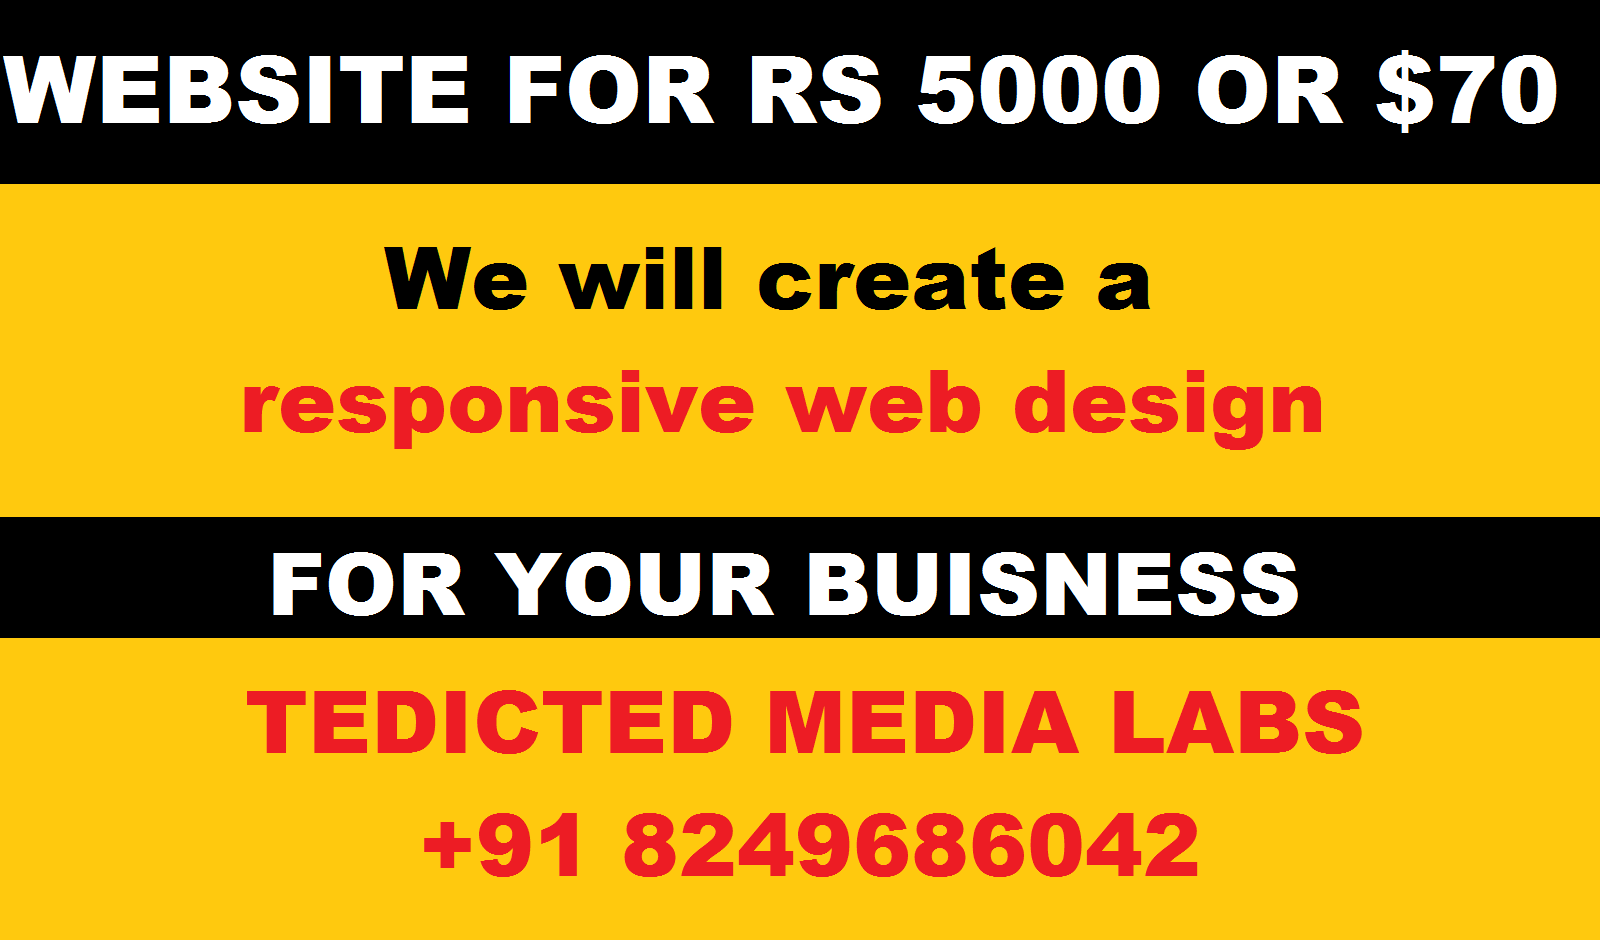 OUR WEB SOLUTIONS COMPANY